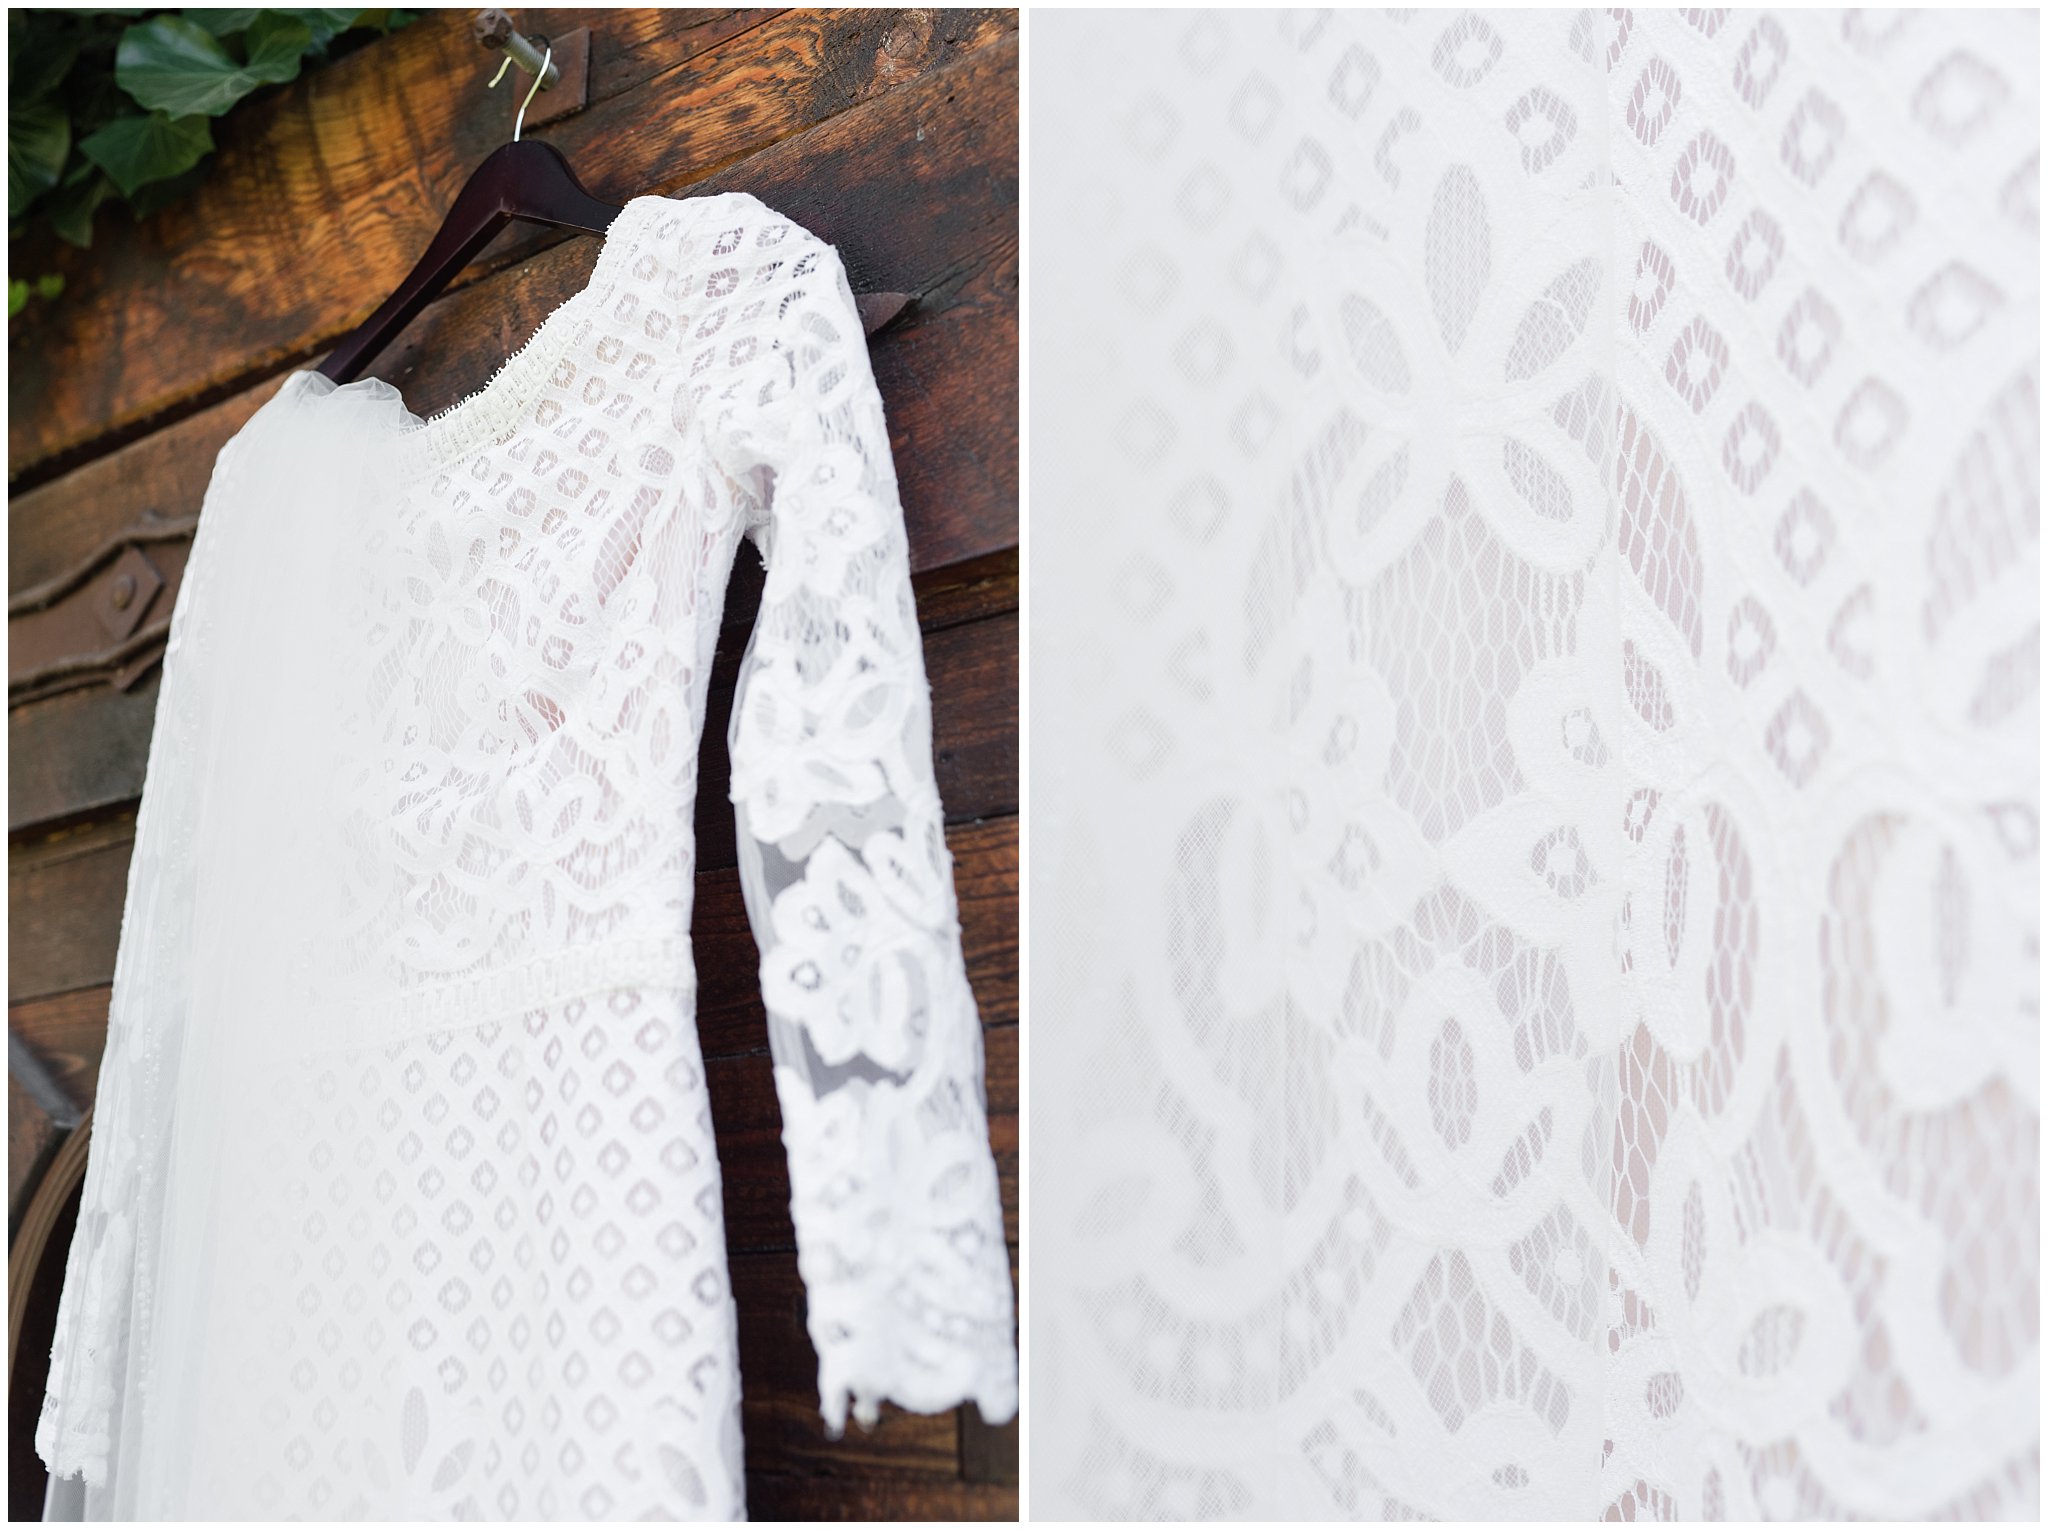 Lace wedding dress details | Wadley Farms Summer Wedding | Jessie and Dallin Photography